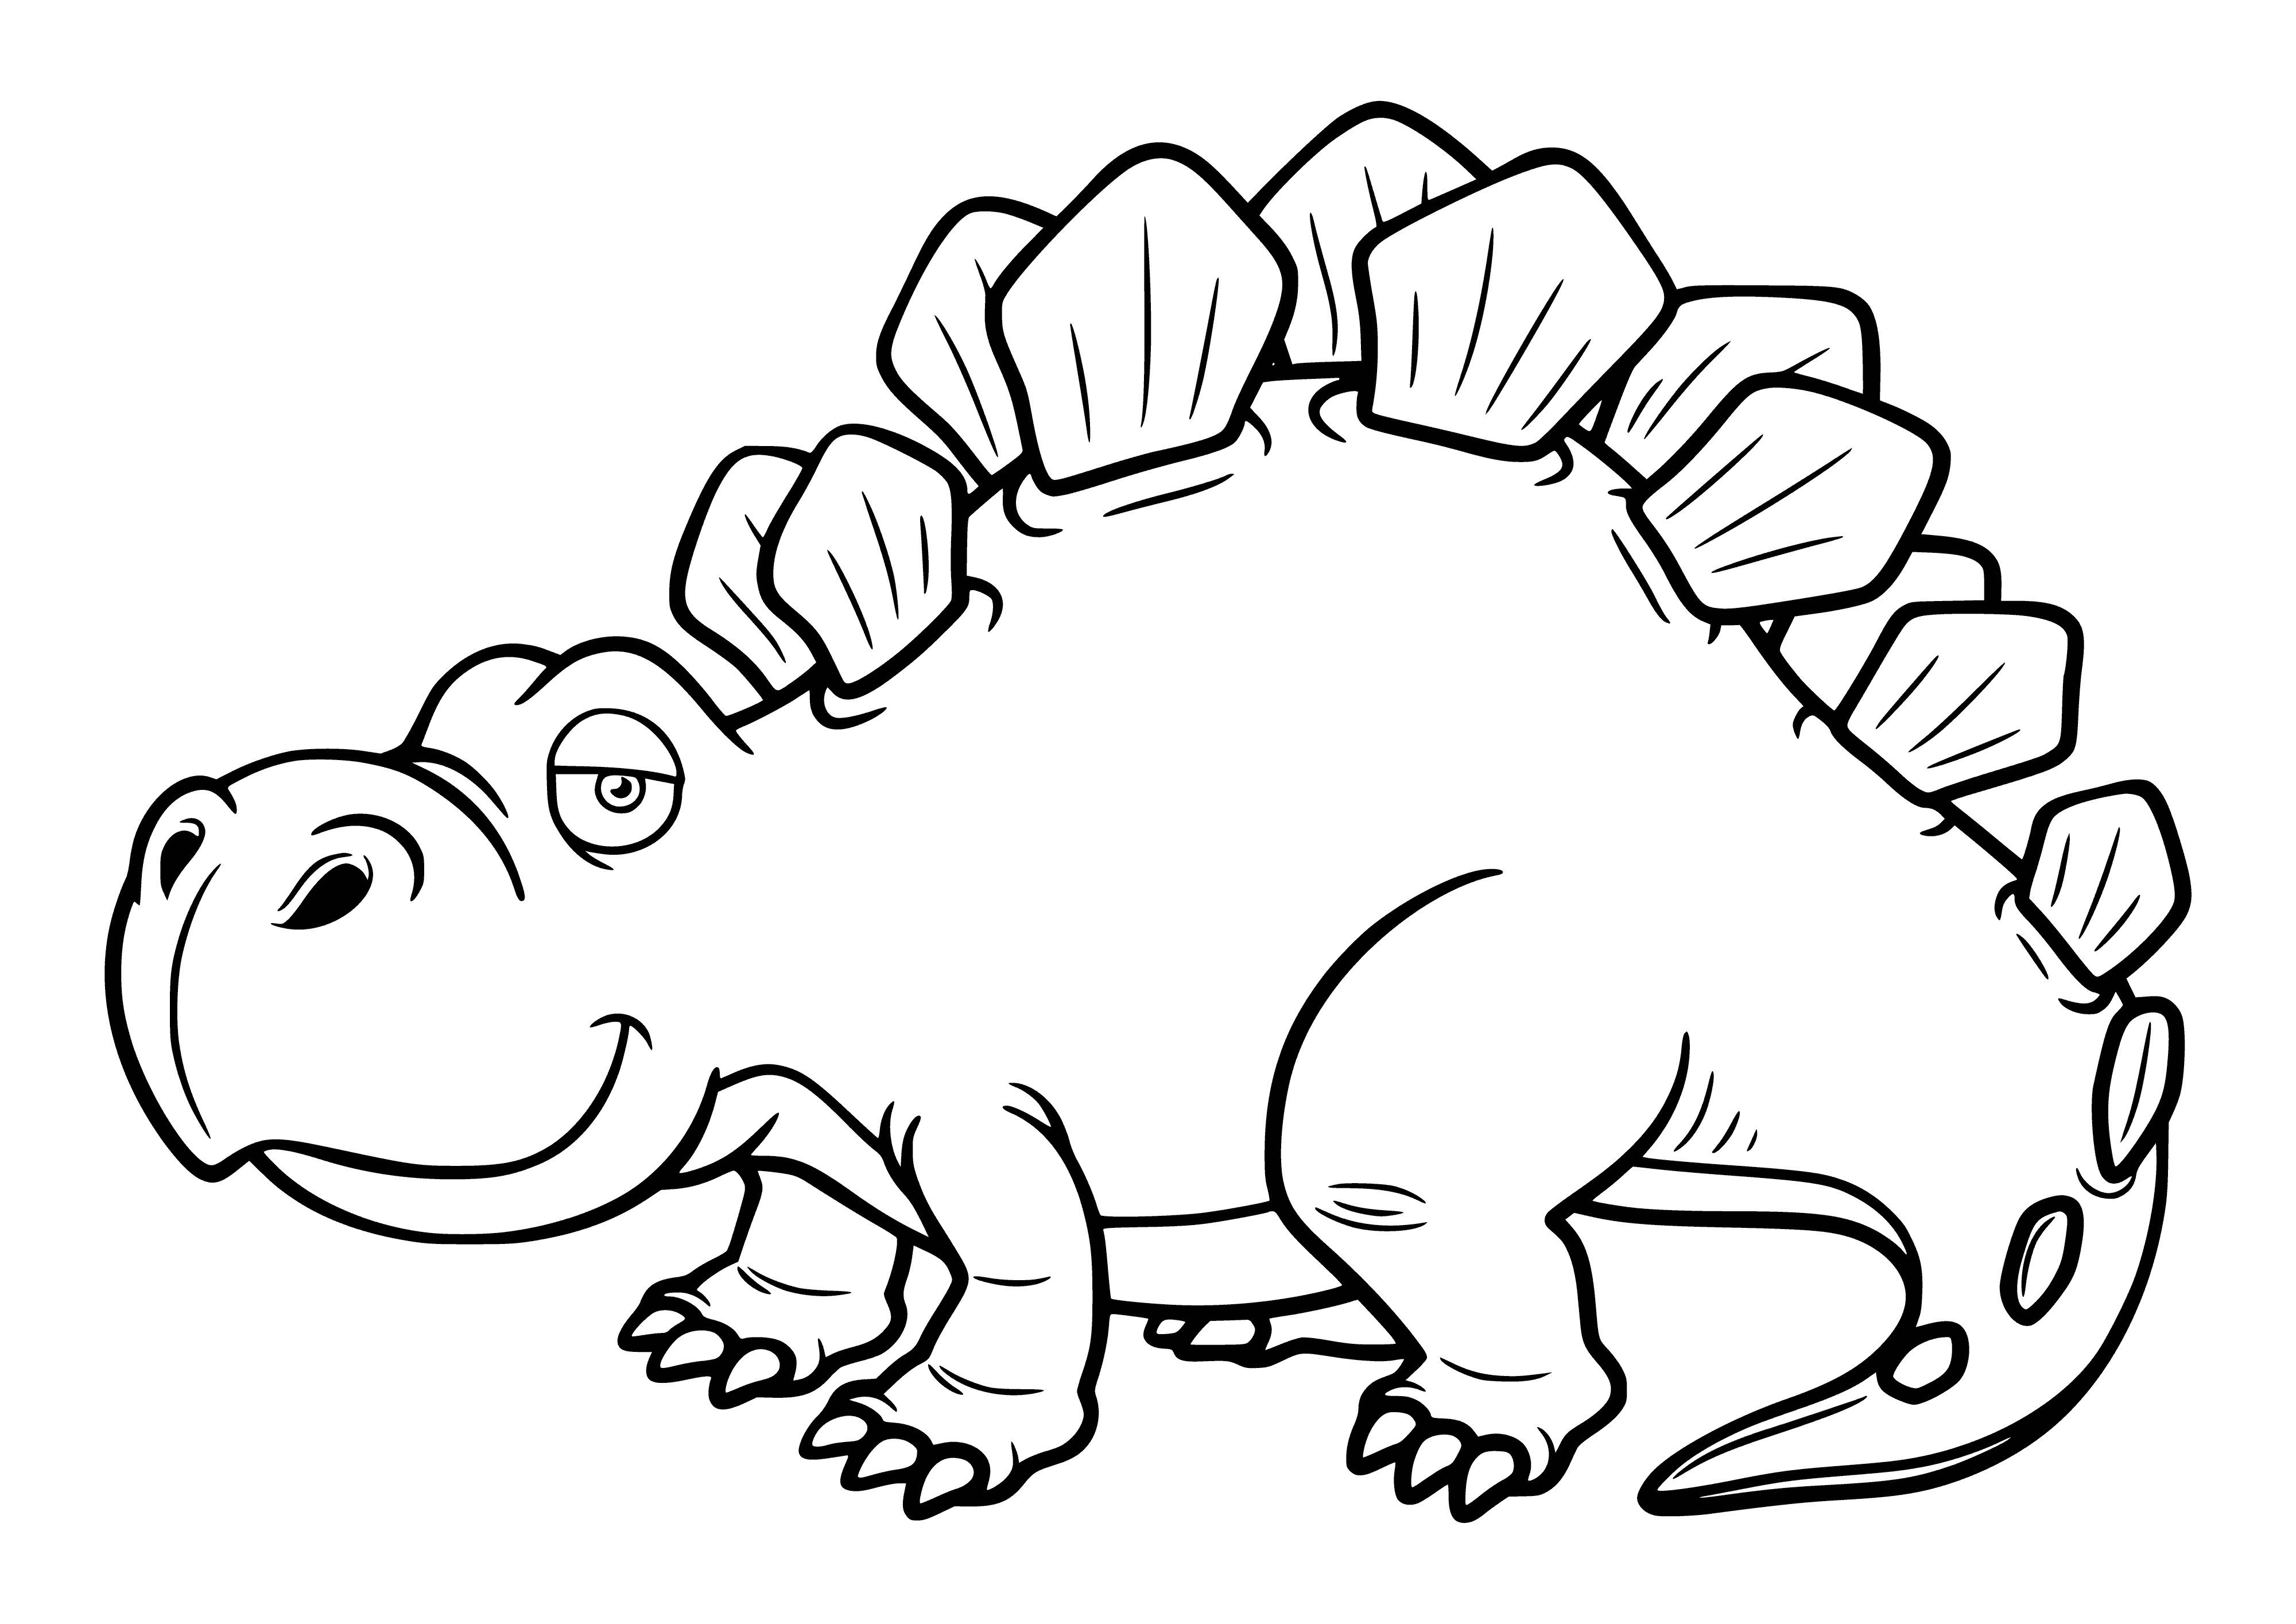 Adult stegosaurus coloring page